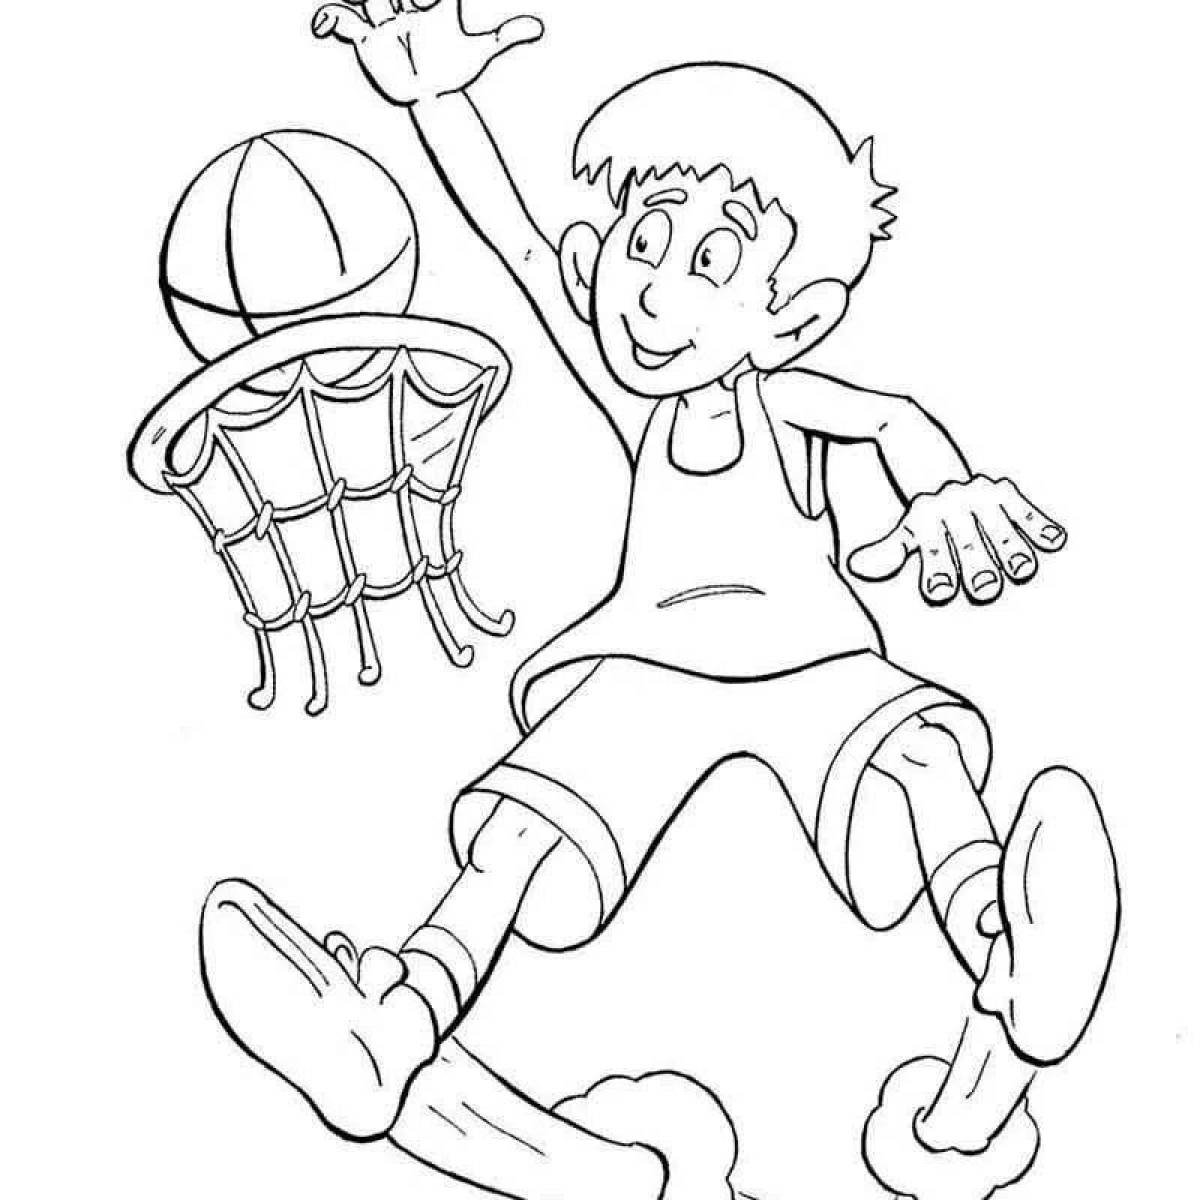 Animated sportsmen coloring pages